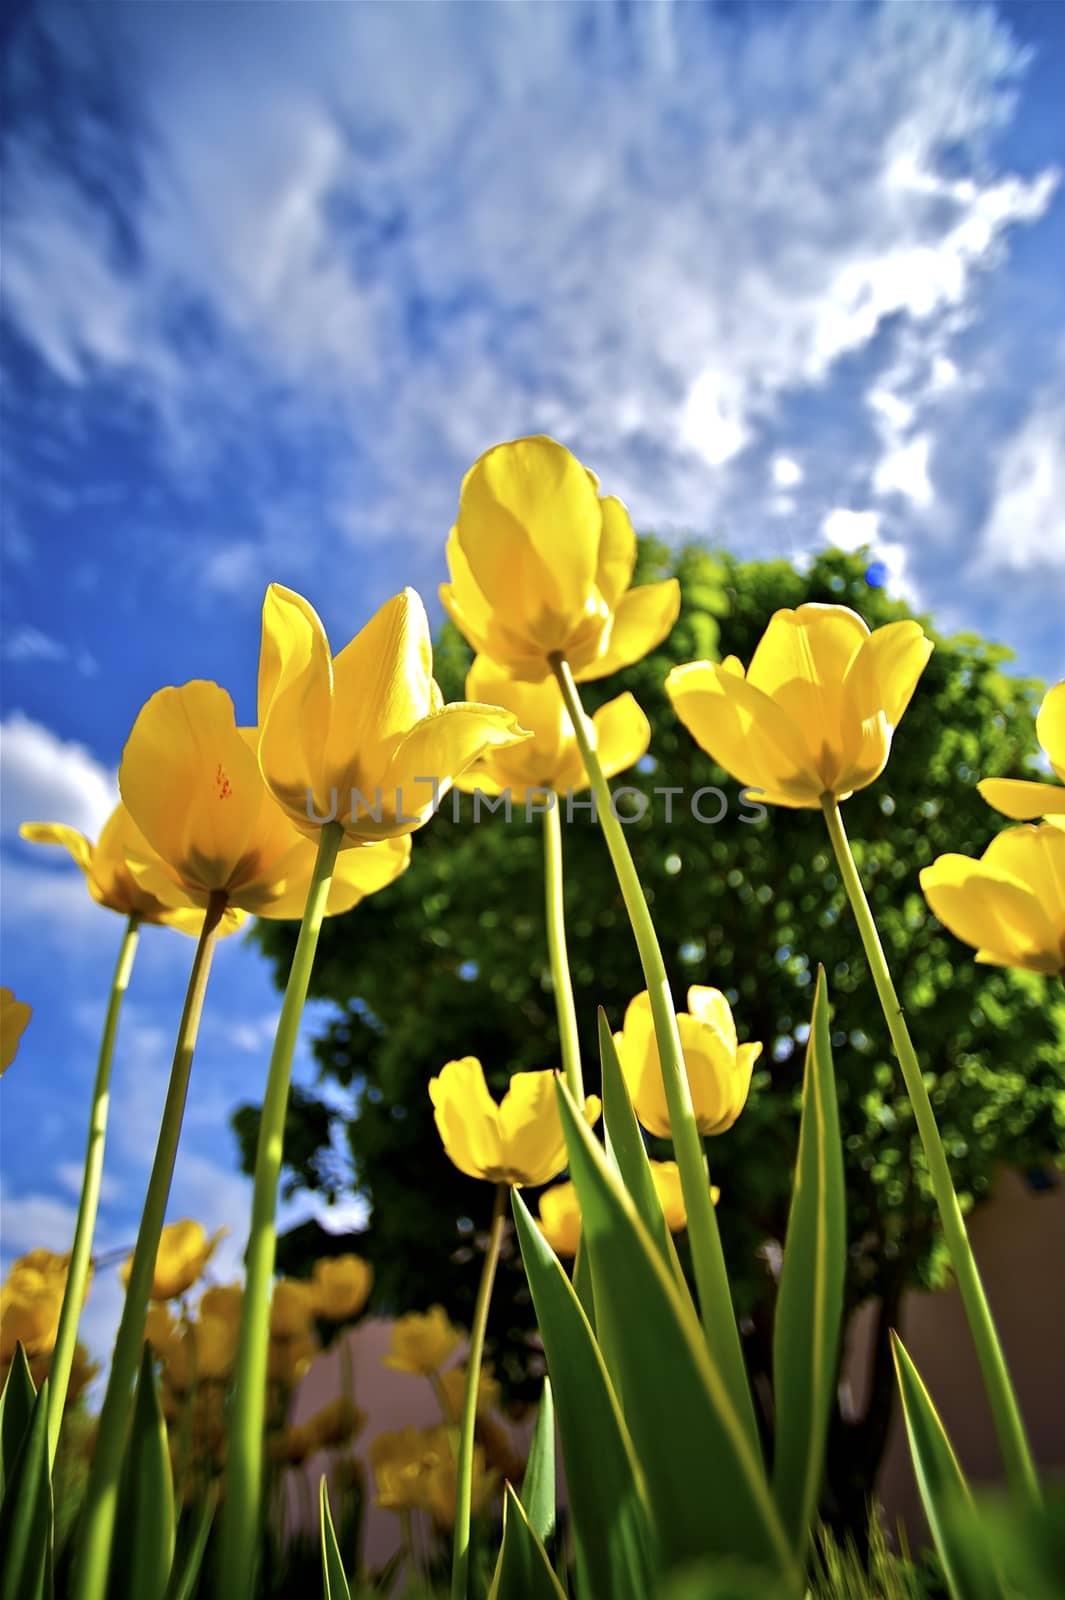 Tall Yellow Blossom Tulips - Wide Angle Photo. Tulips in the Garden. Sunny Day. Nature Photo Collection.